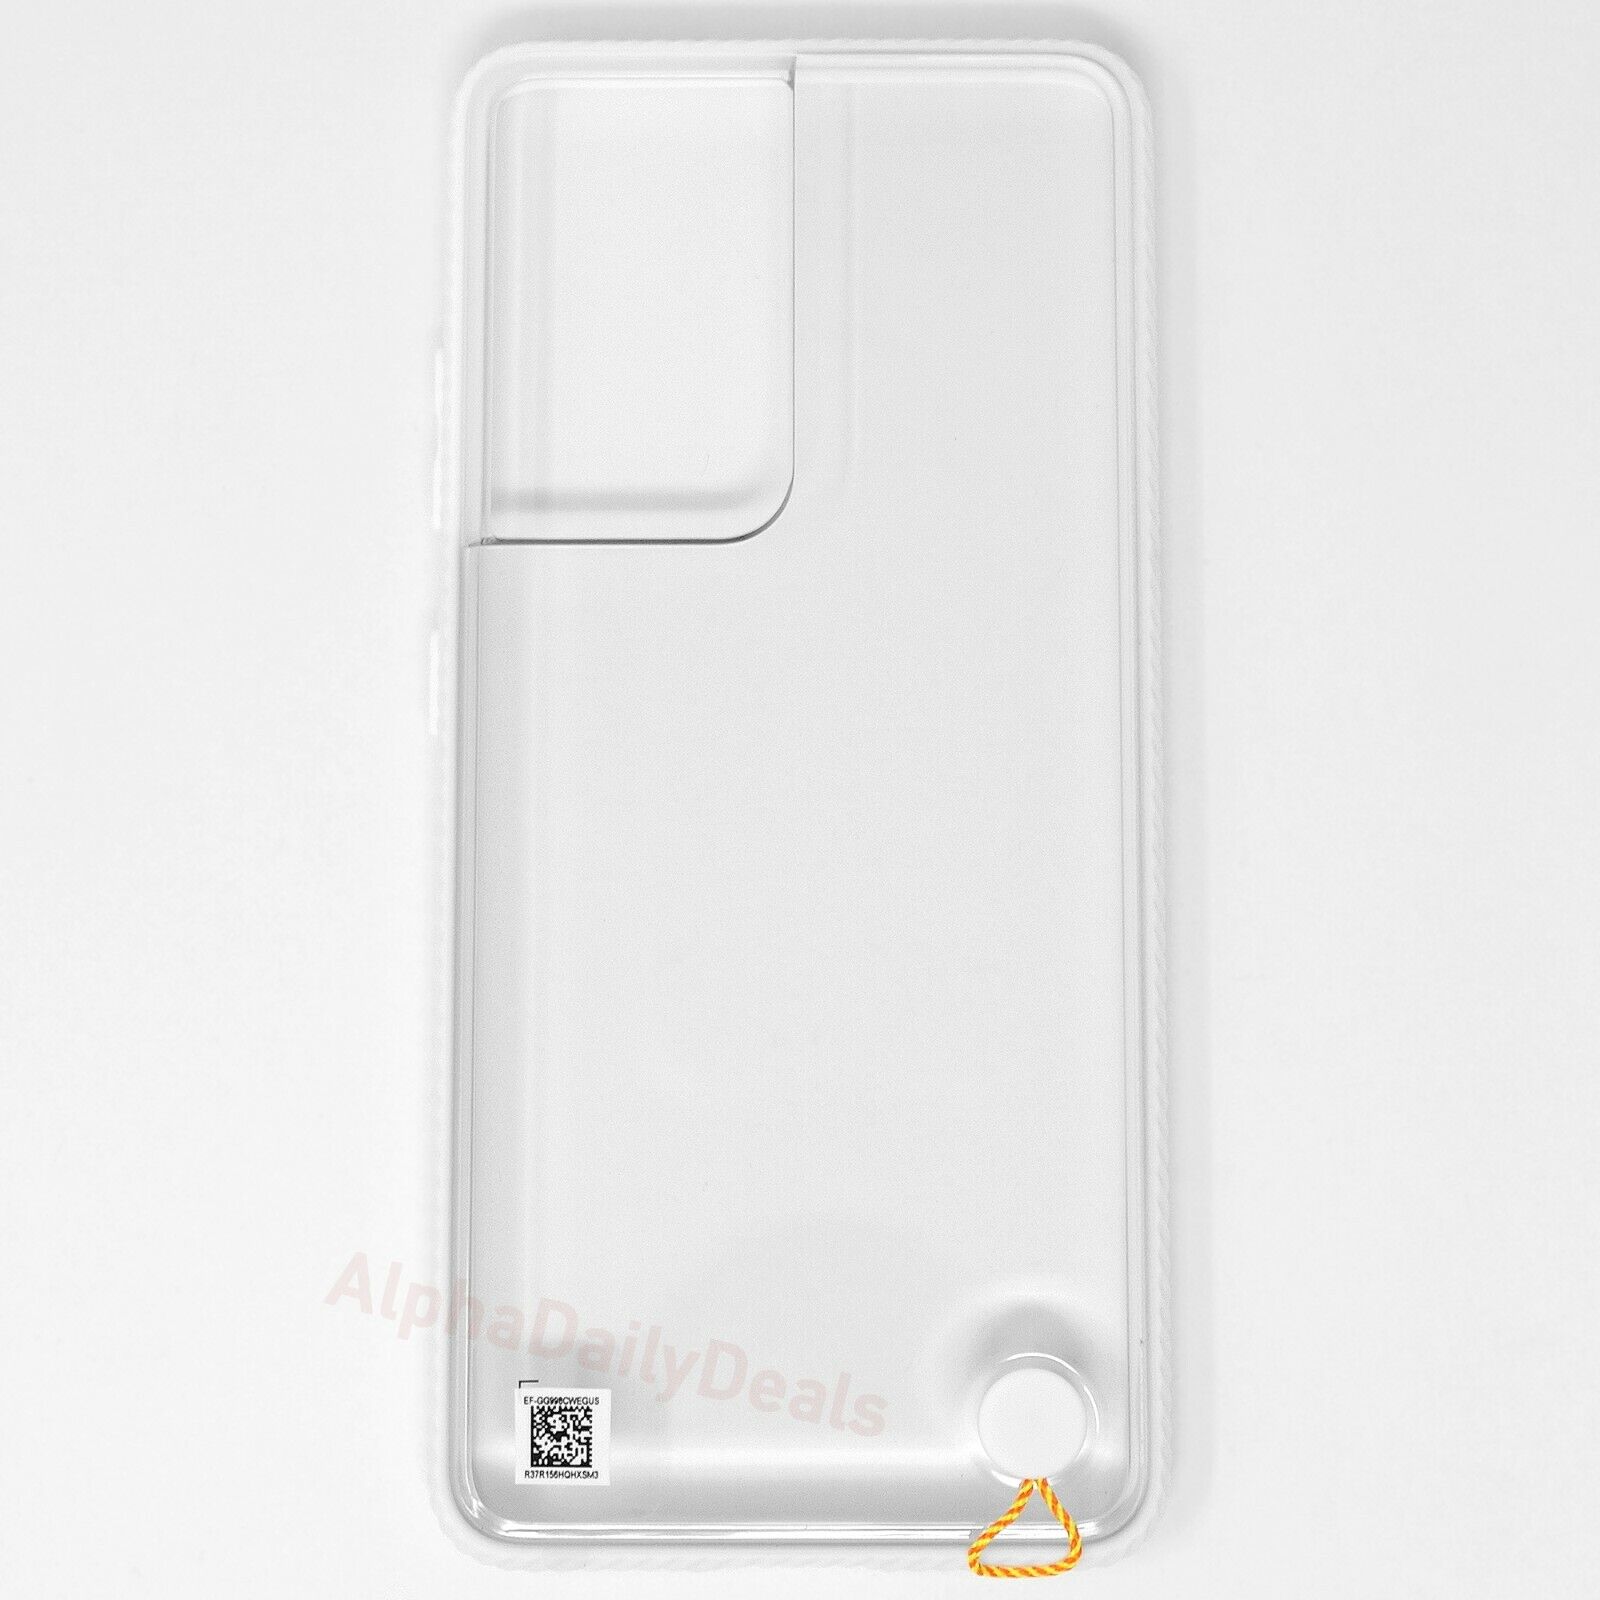 Genuine OEM Samsung Galaxy S21 Ultra 5G Clear Protective Cover Case